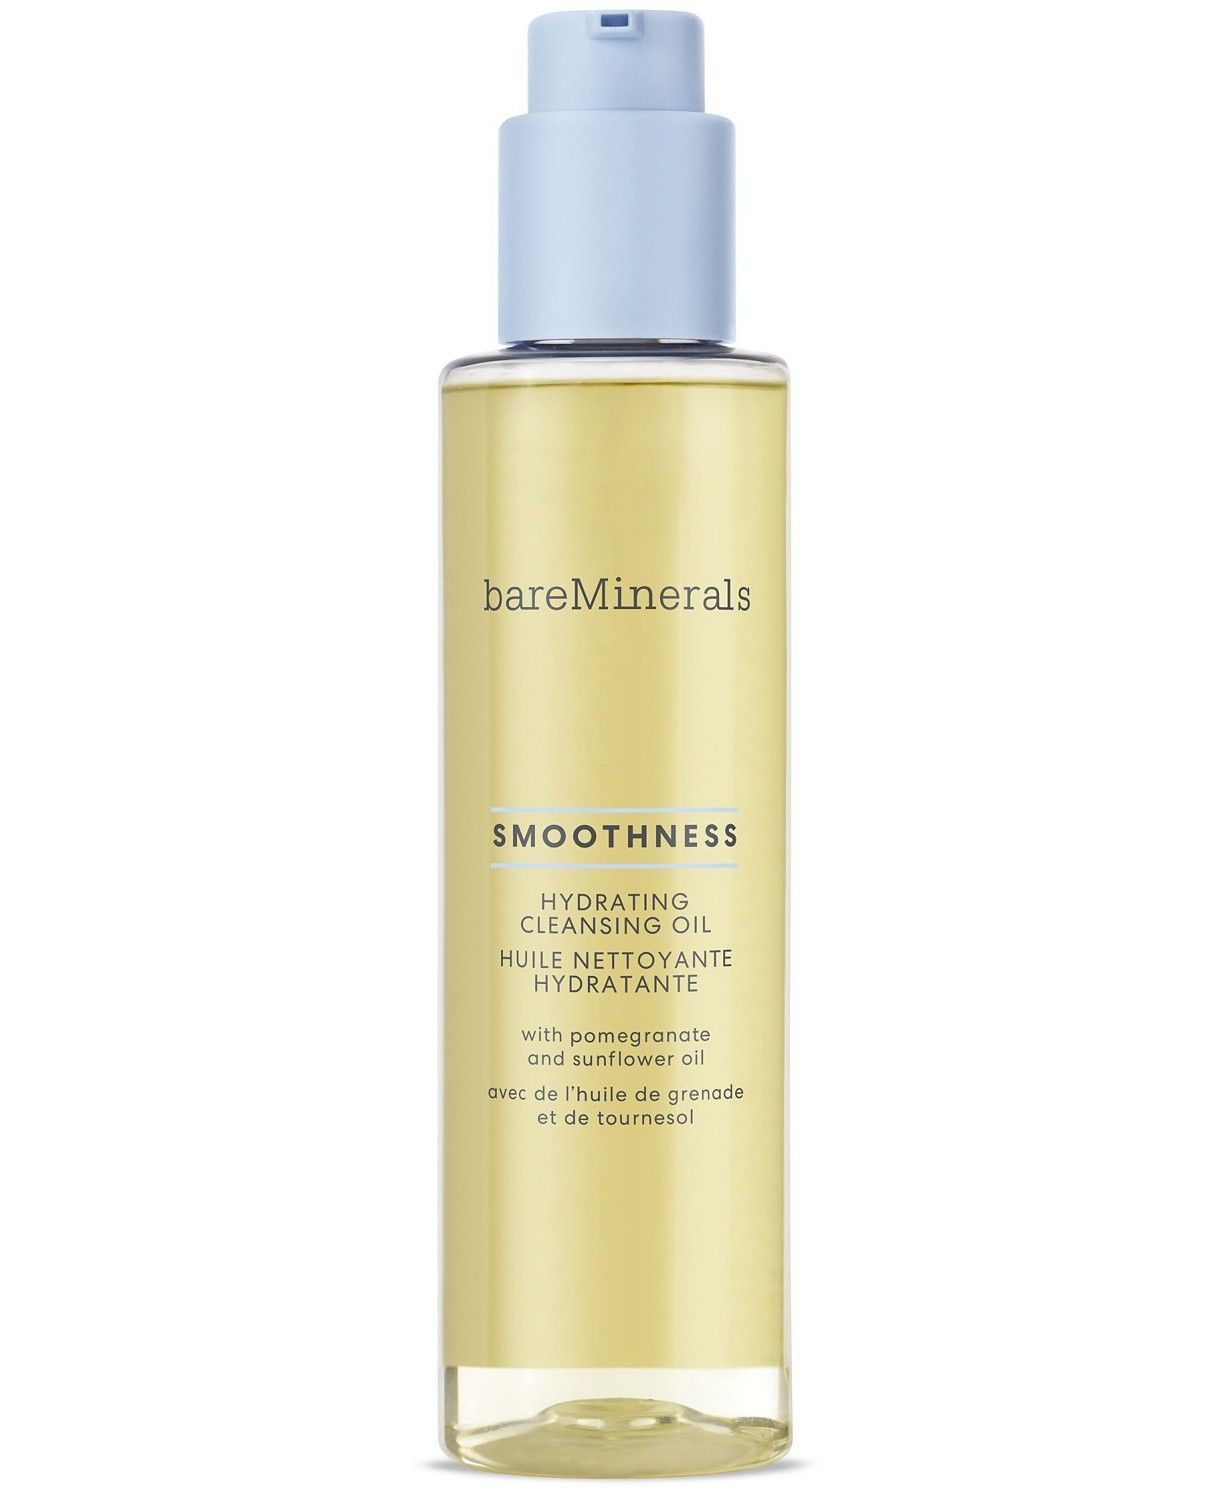 SMOOTHNESS Hydrating Cleansing Oil